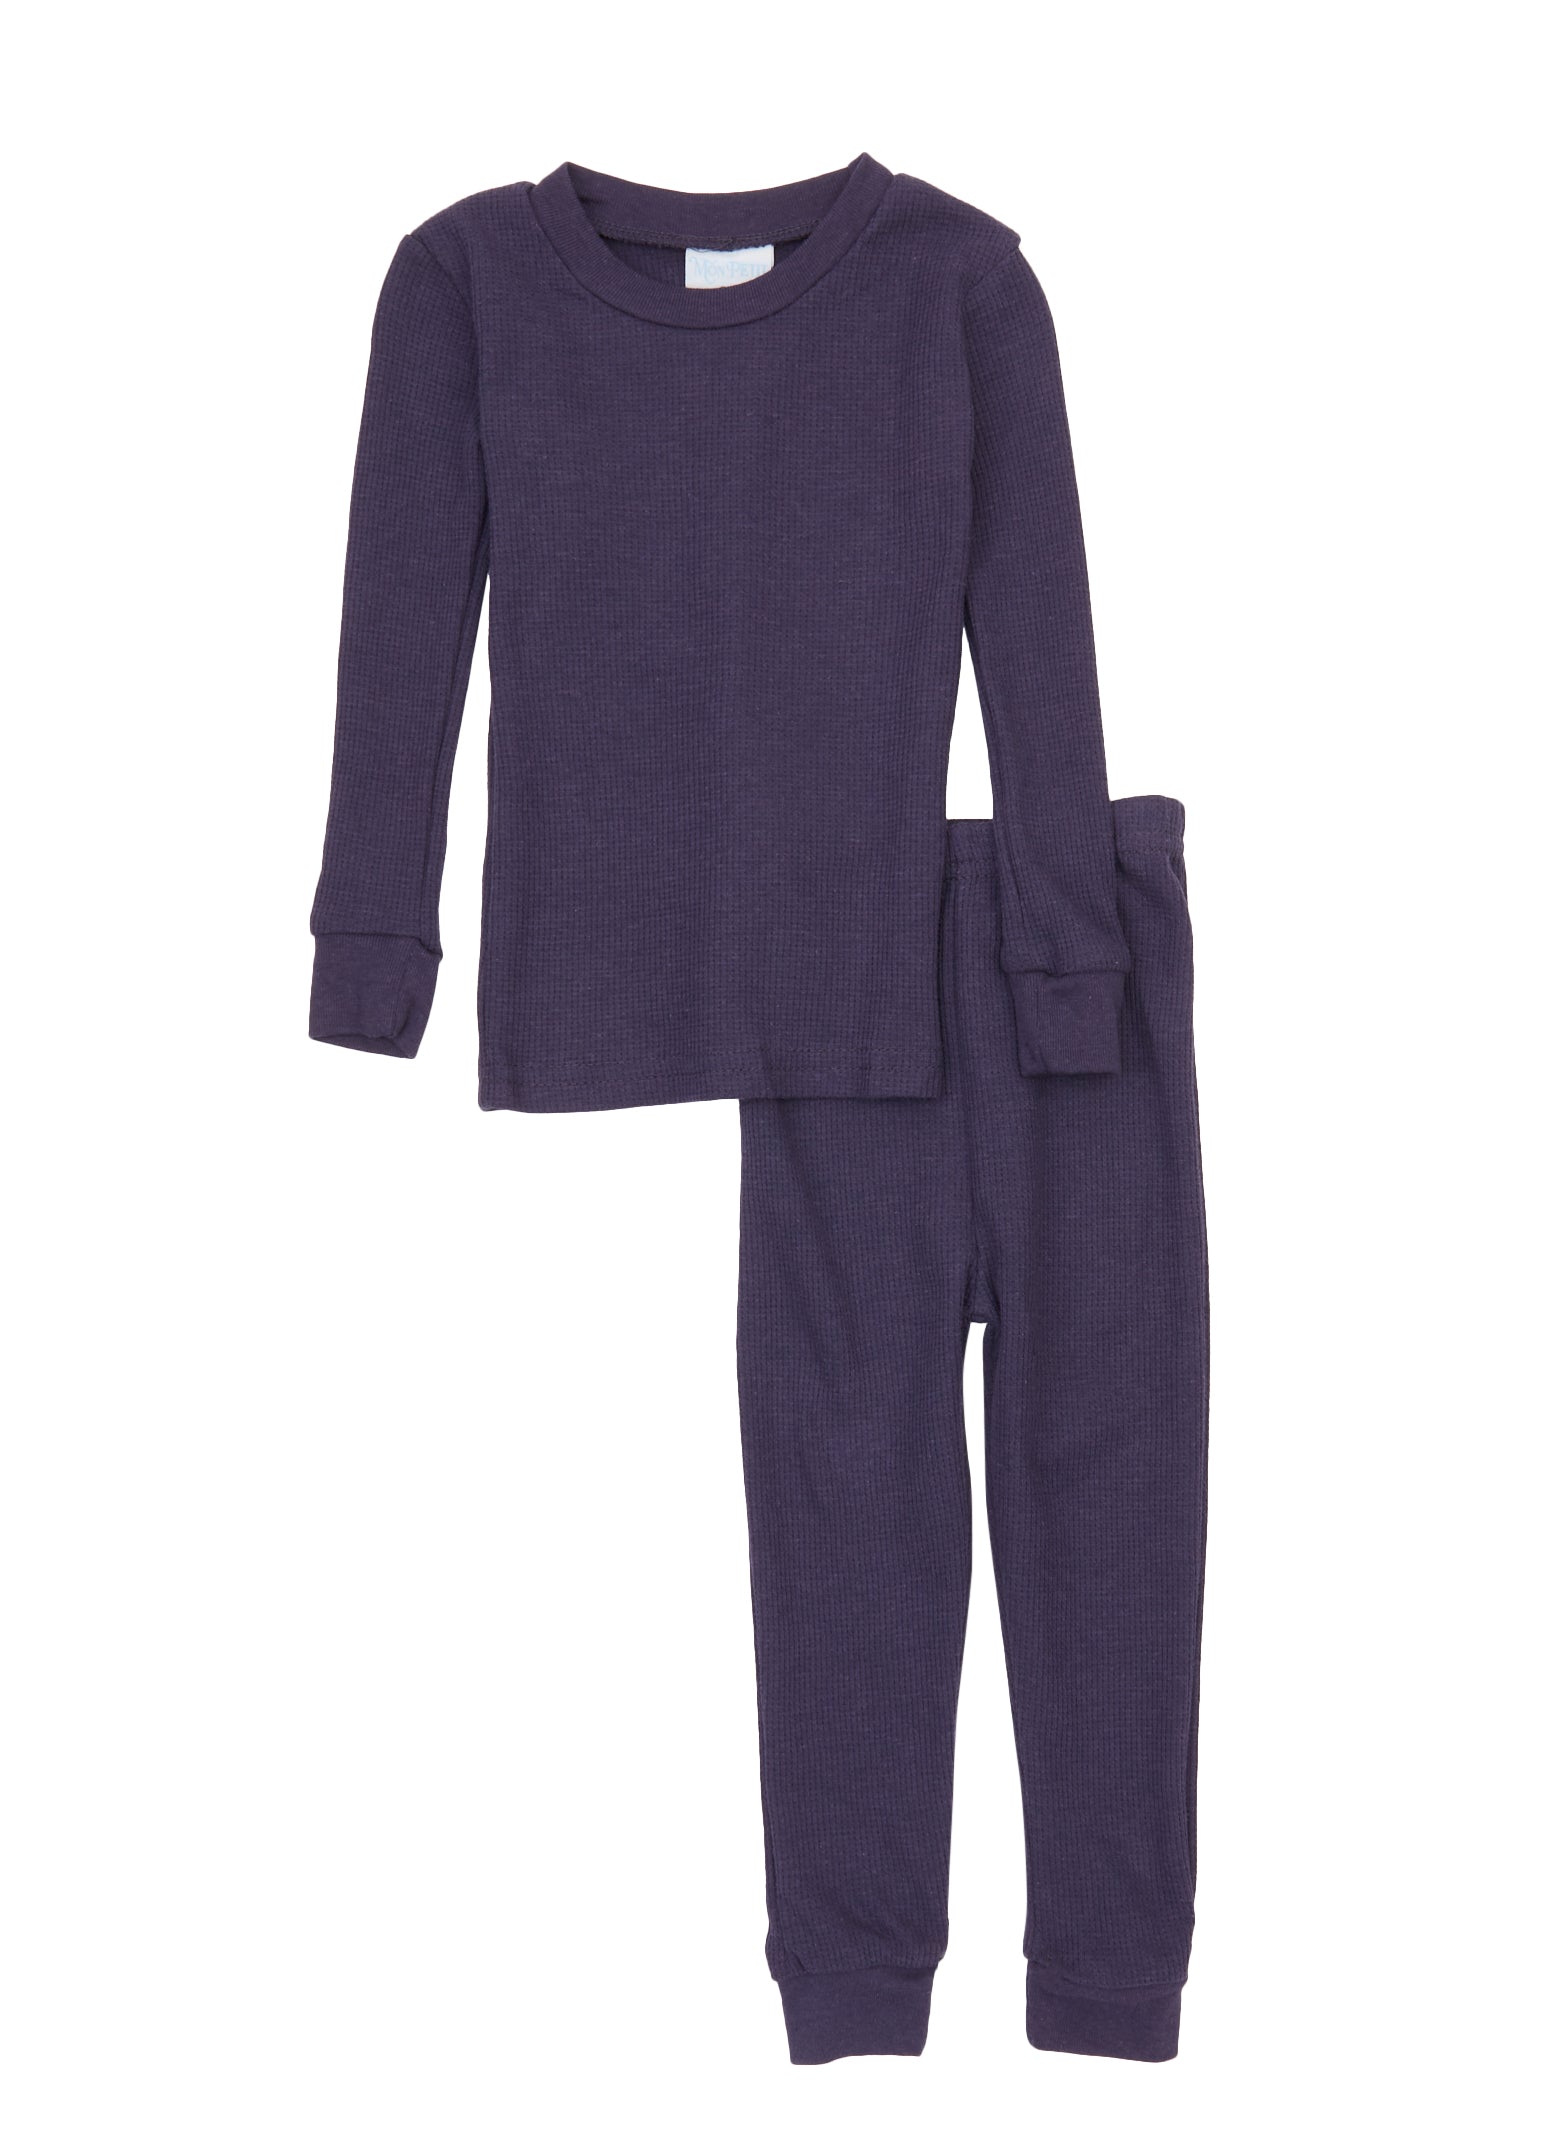 Toddler Boys Solid Thermal Top and Pants Set - Purple